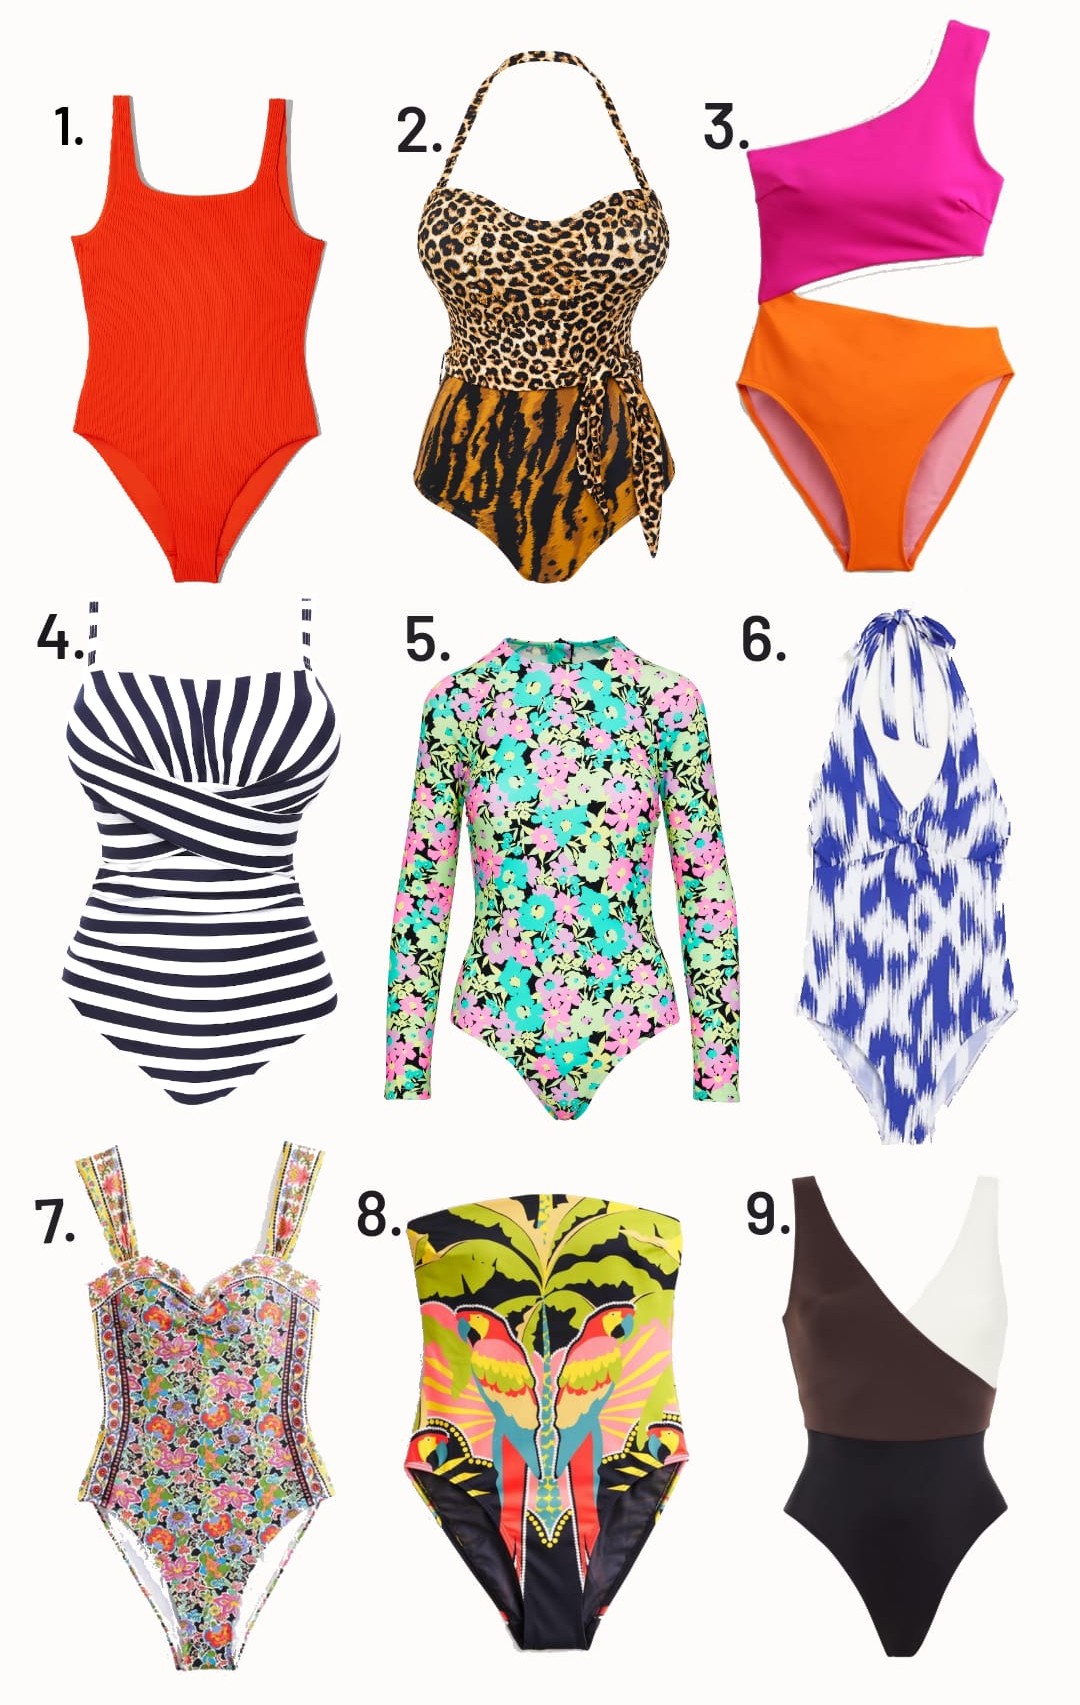 THE BRIGHT & BOLD SWIMSUIT EDIT